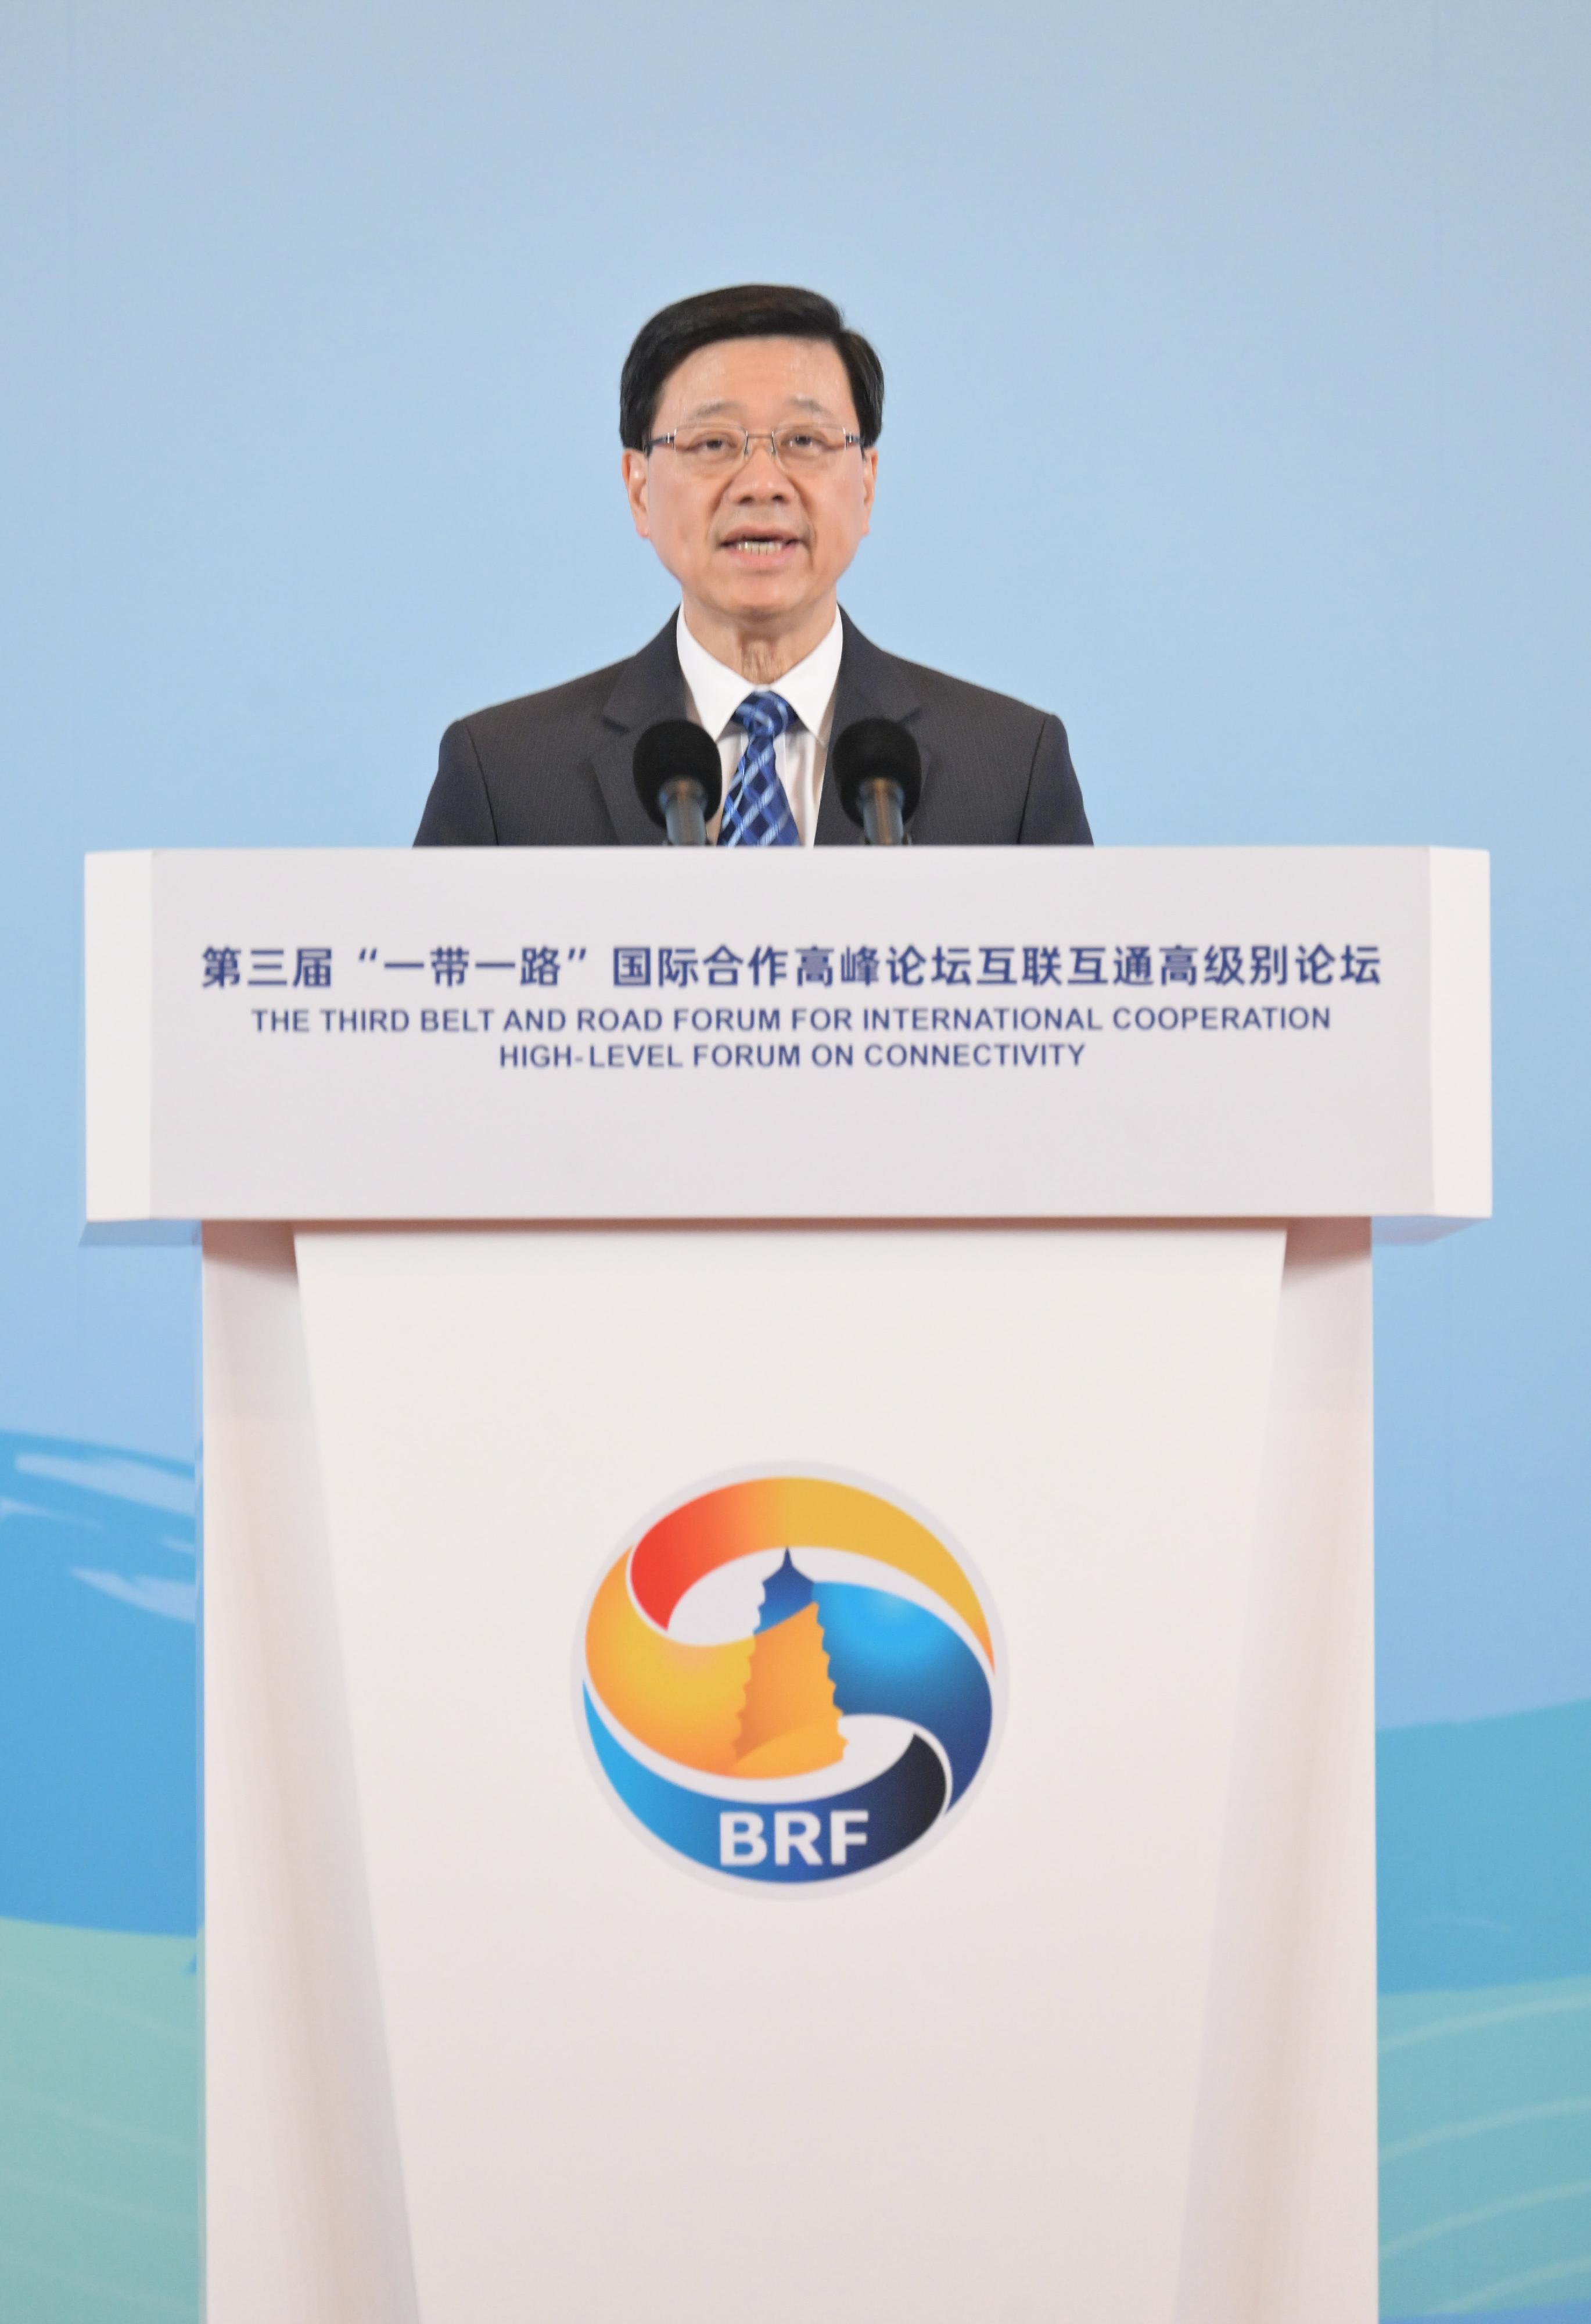 The Chief Executive, Mr John Lee, led a high-level Hong Kong Special Administrative Region delegation comprising senior government officials and members of various sectors to participate in the third Belt and Road Forum for International Cooperation in Beijing today (October 18).  Photo shows Mr Lee speaking at the High-level Forum on Connectivity.